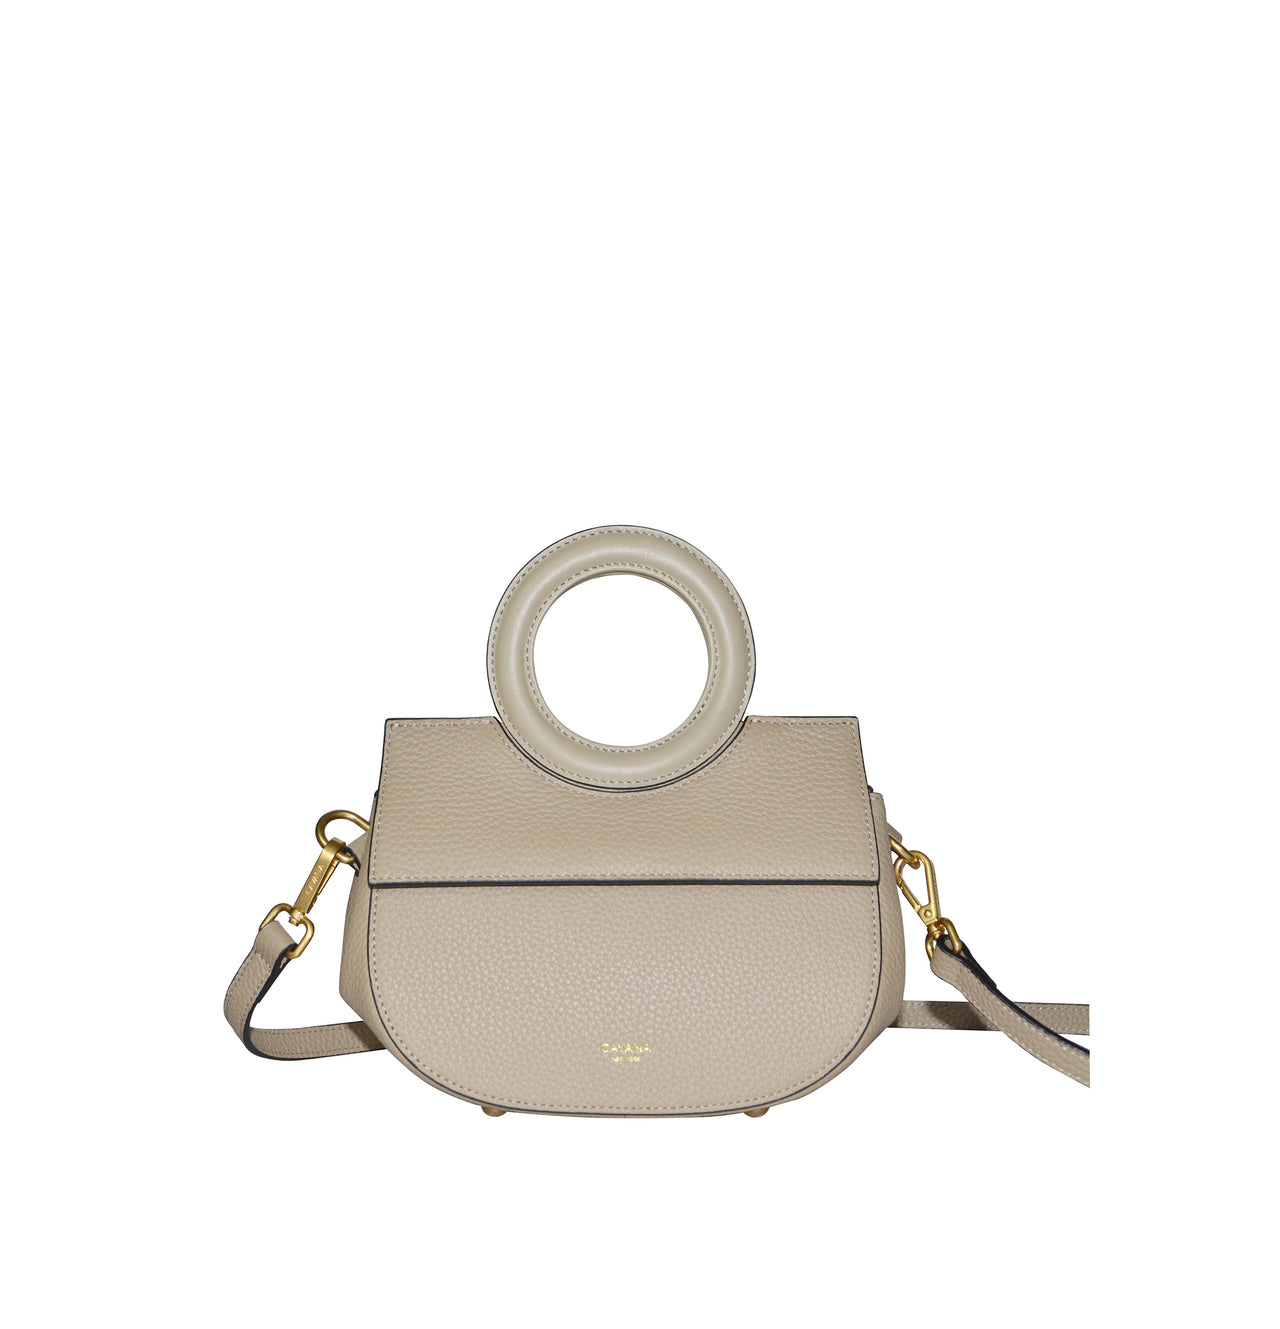 MILAN MOON BAG S IN TRENCH